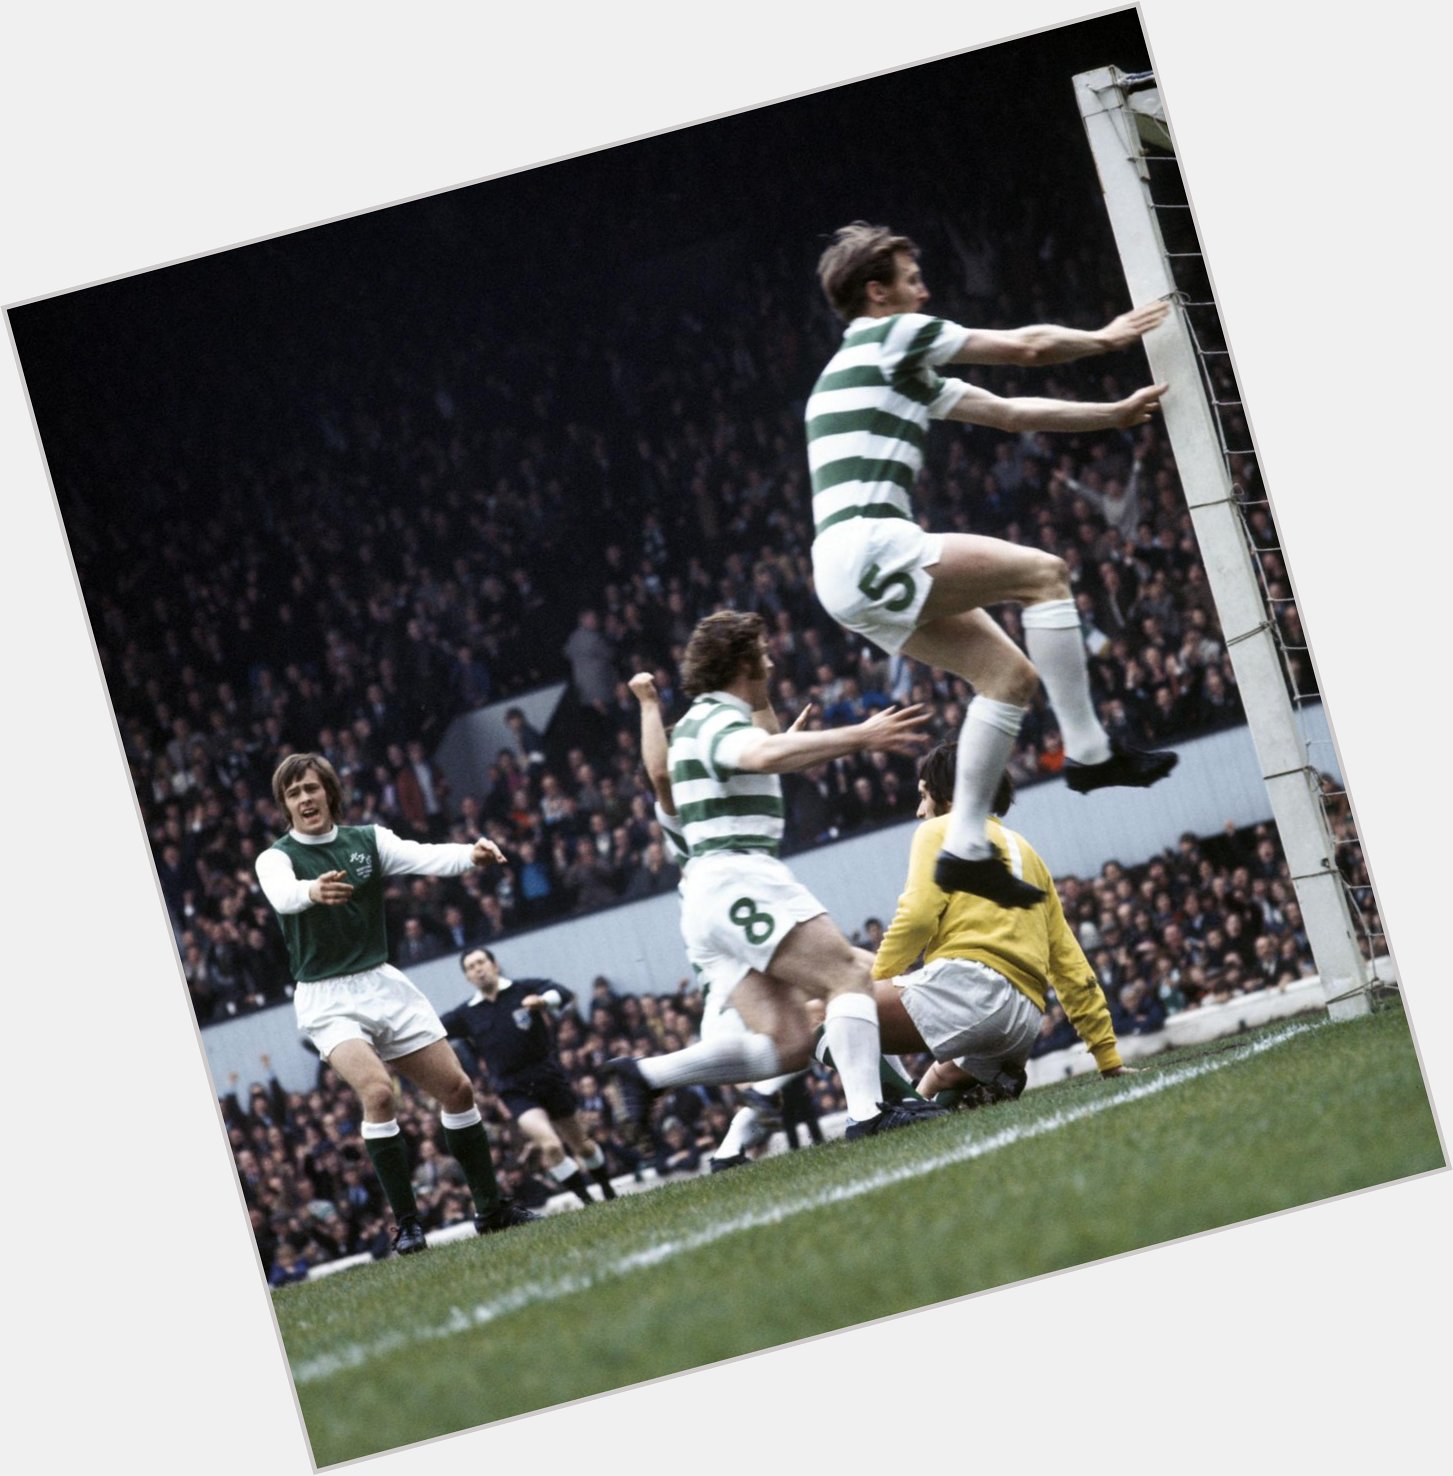 Happy Birthday to big Billy - 75 today.

Billy McNeill scores in the 1972 Scottish Cup final - Celtic 6 Hibernian 1 